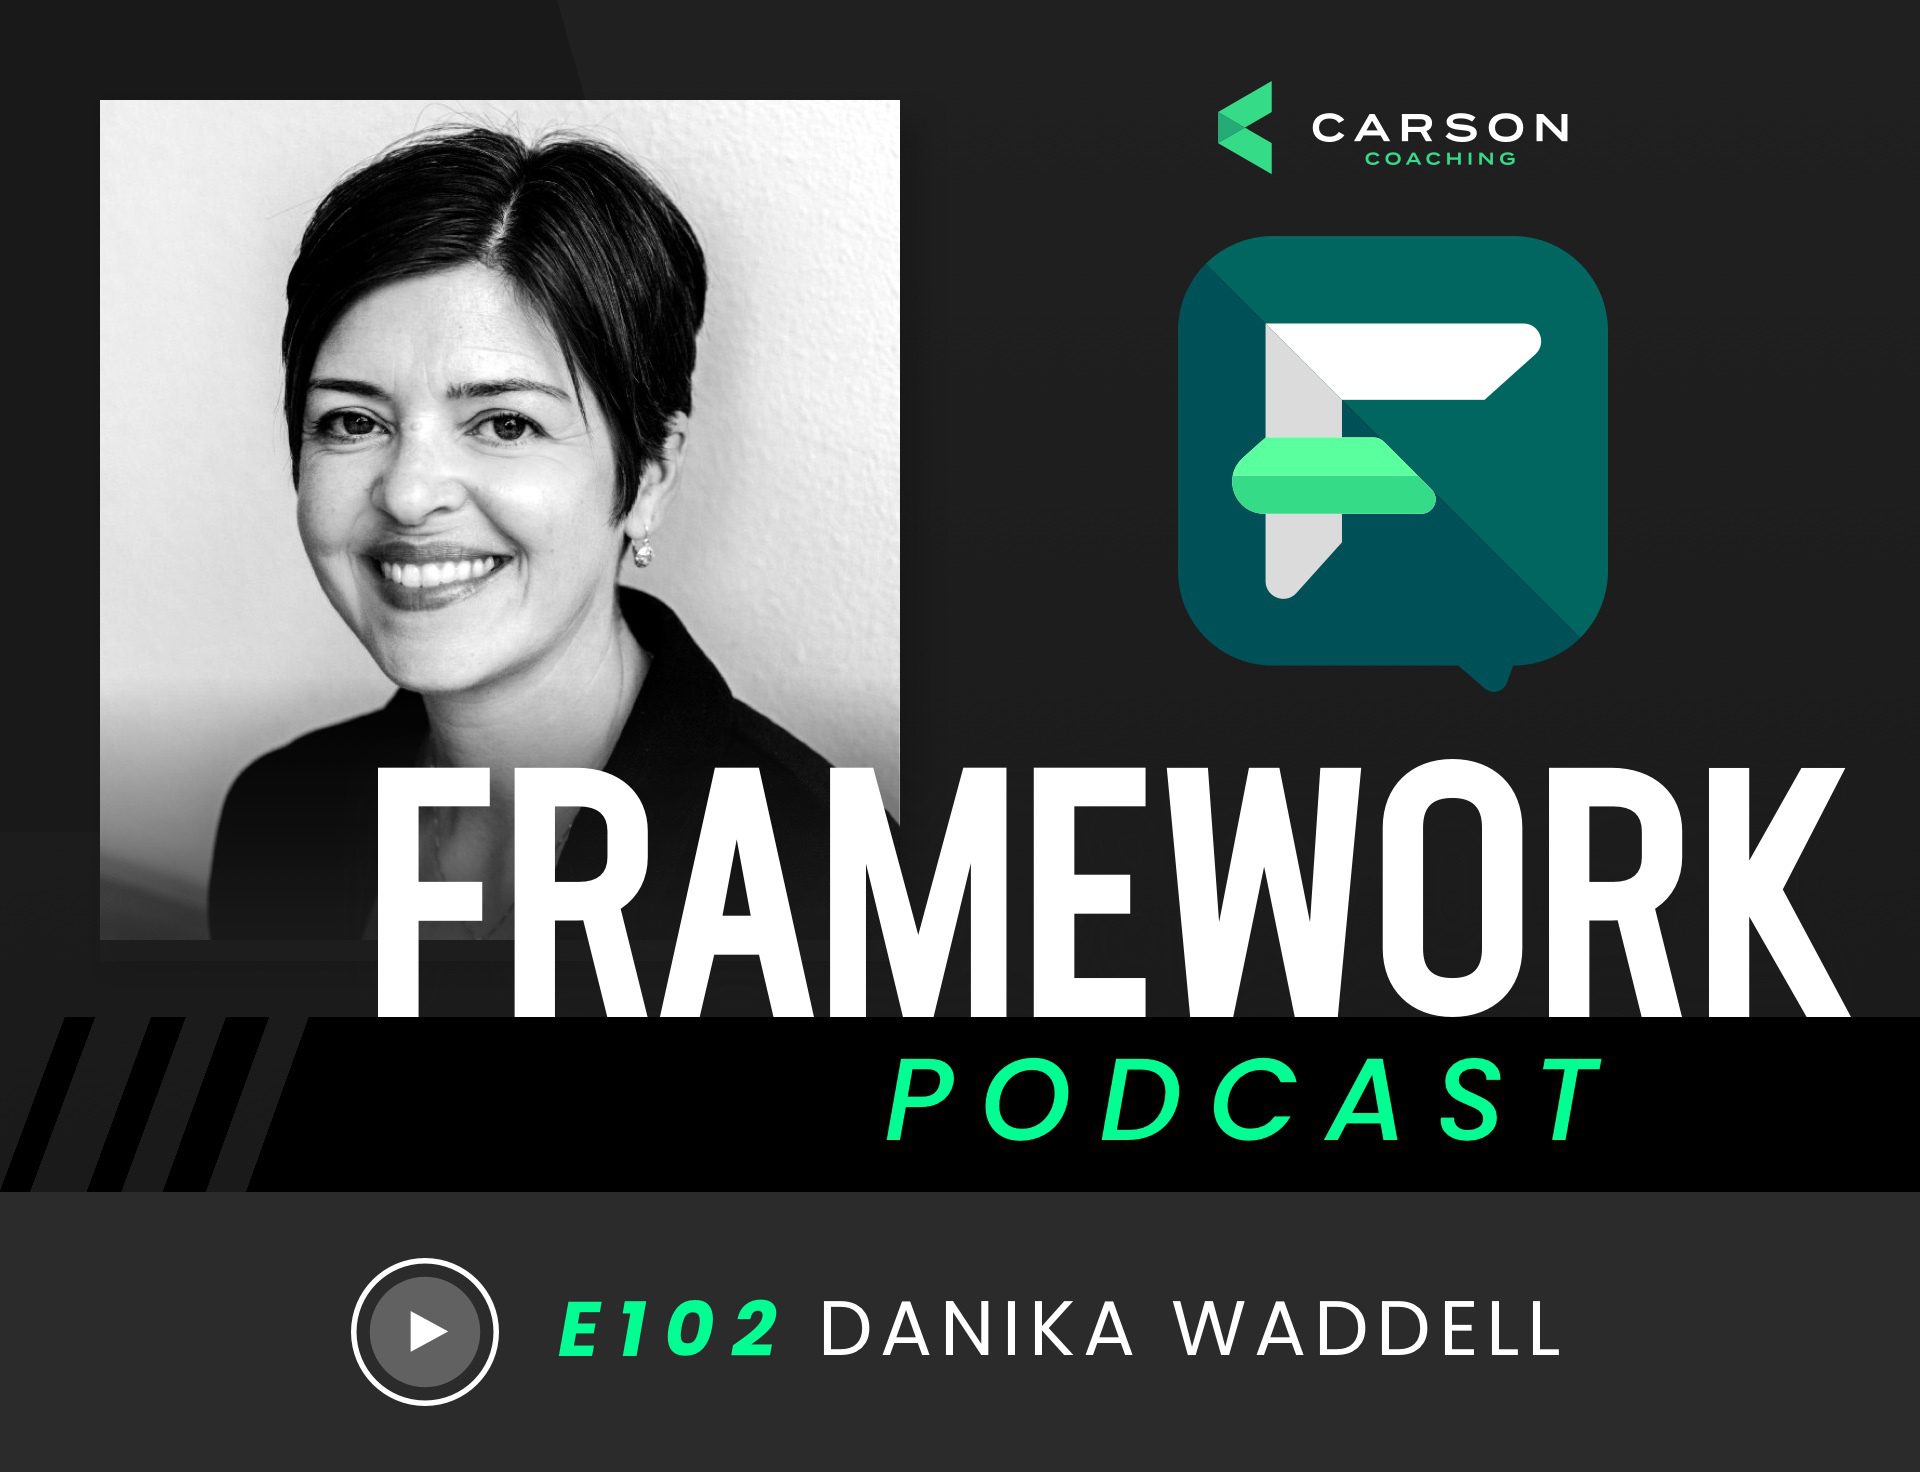 Danika Waddell: Turning Crisis Into Opportunity